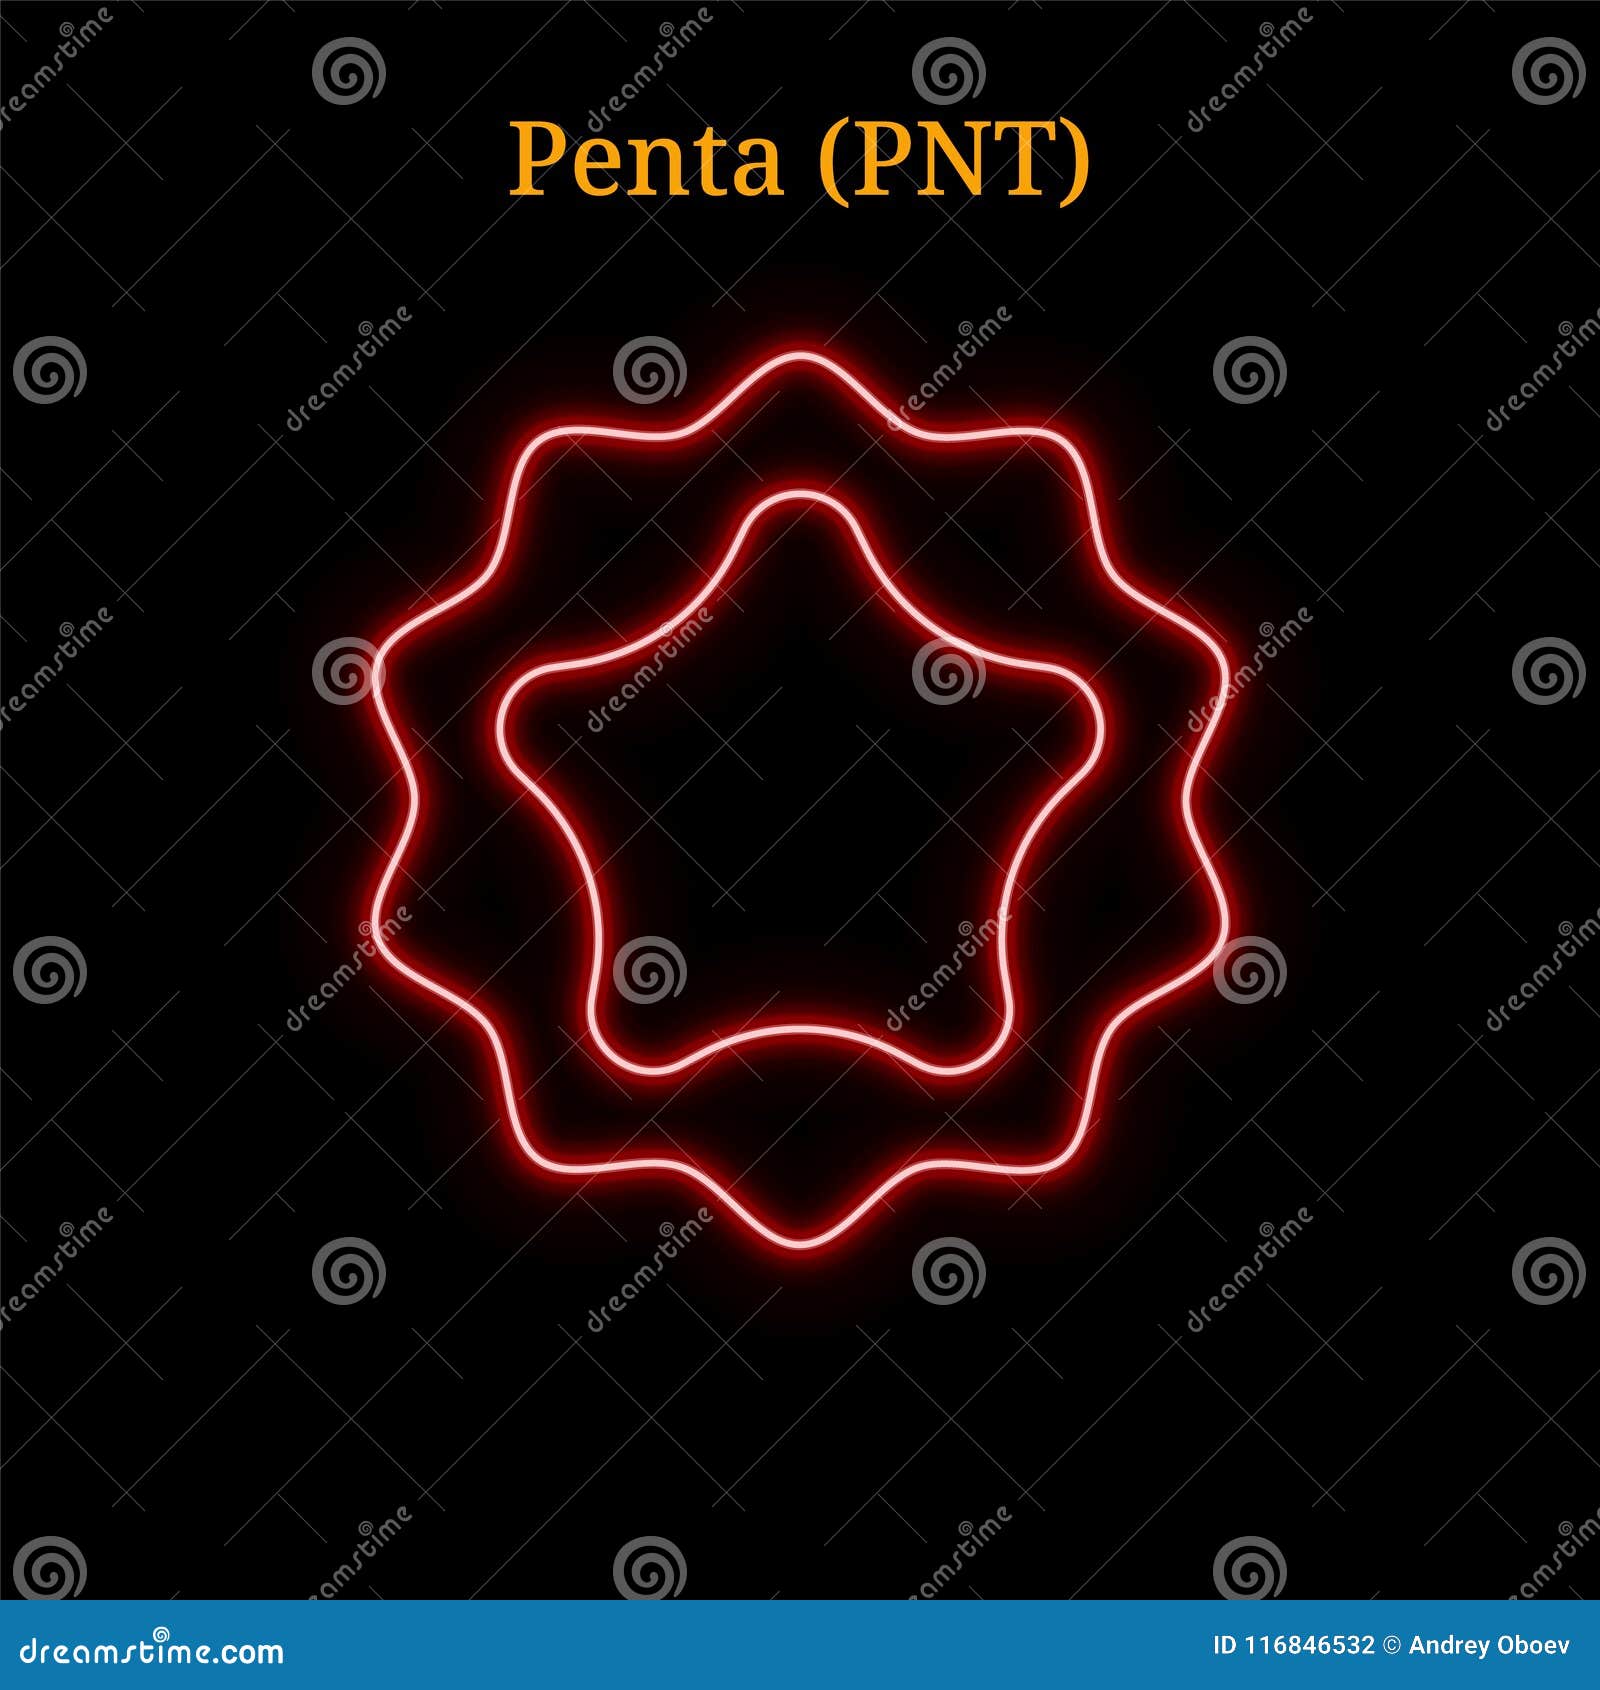 pnt crypto currency